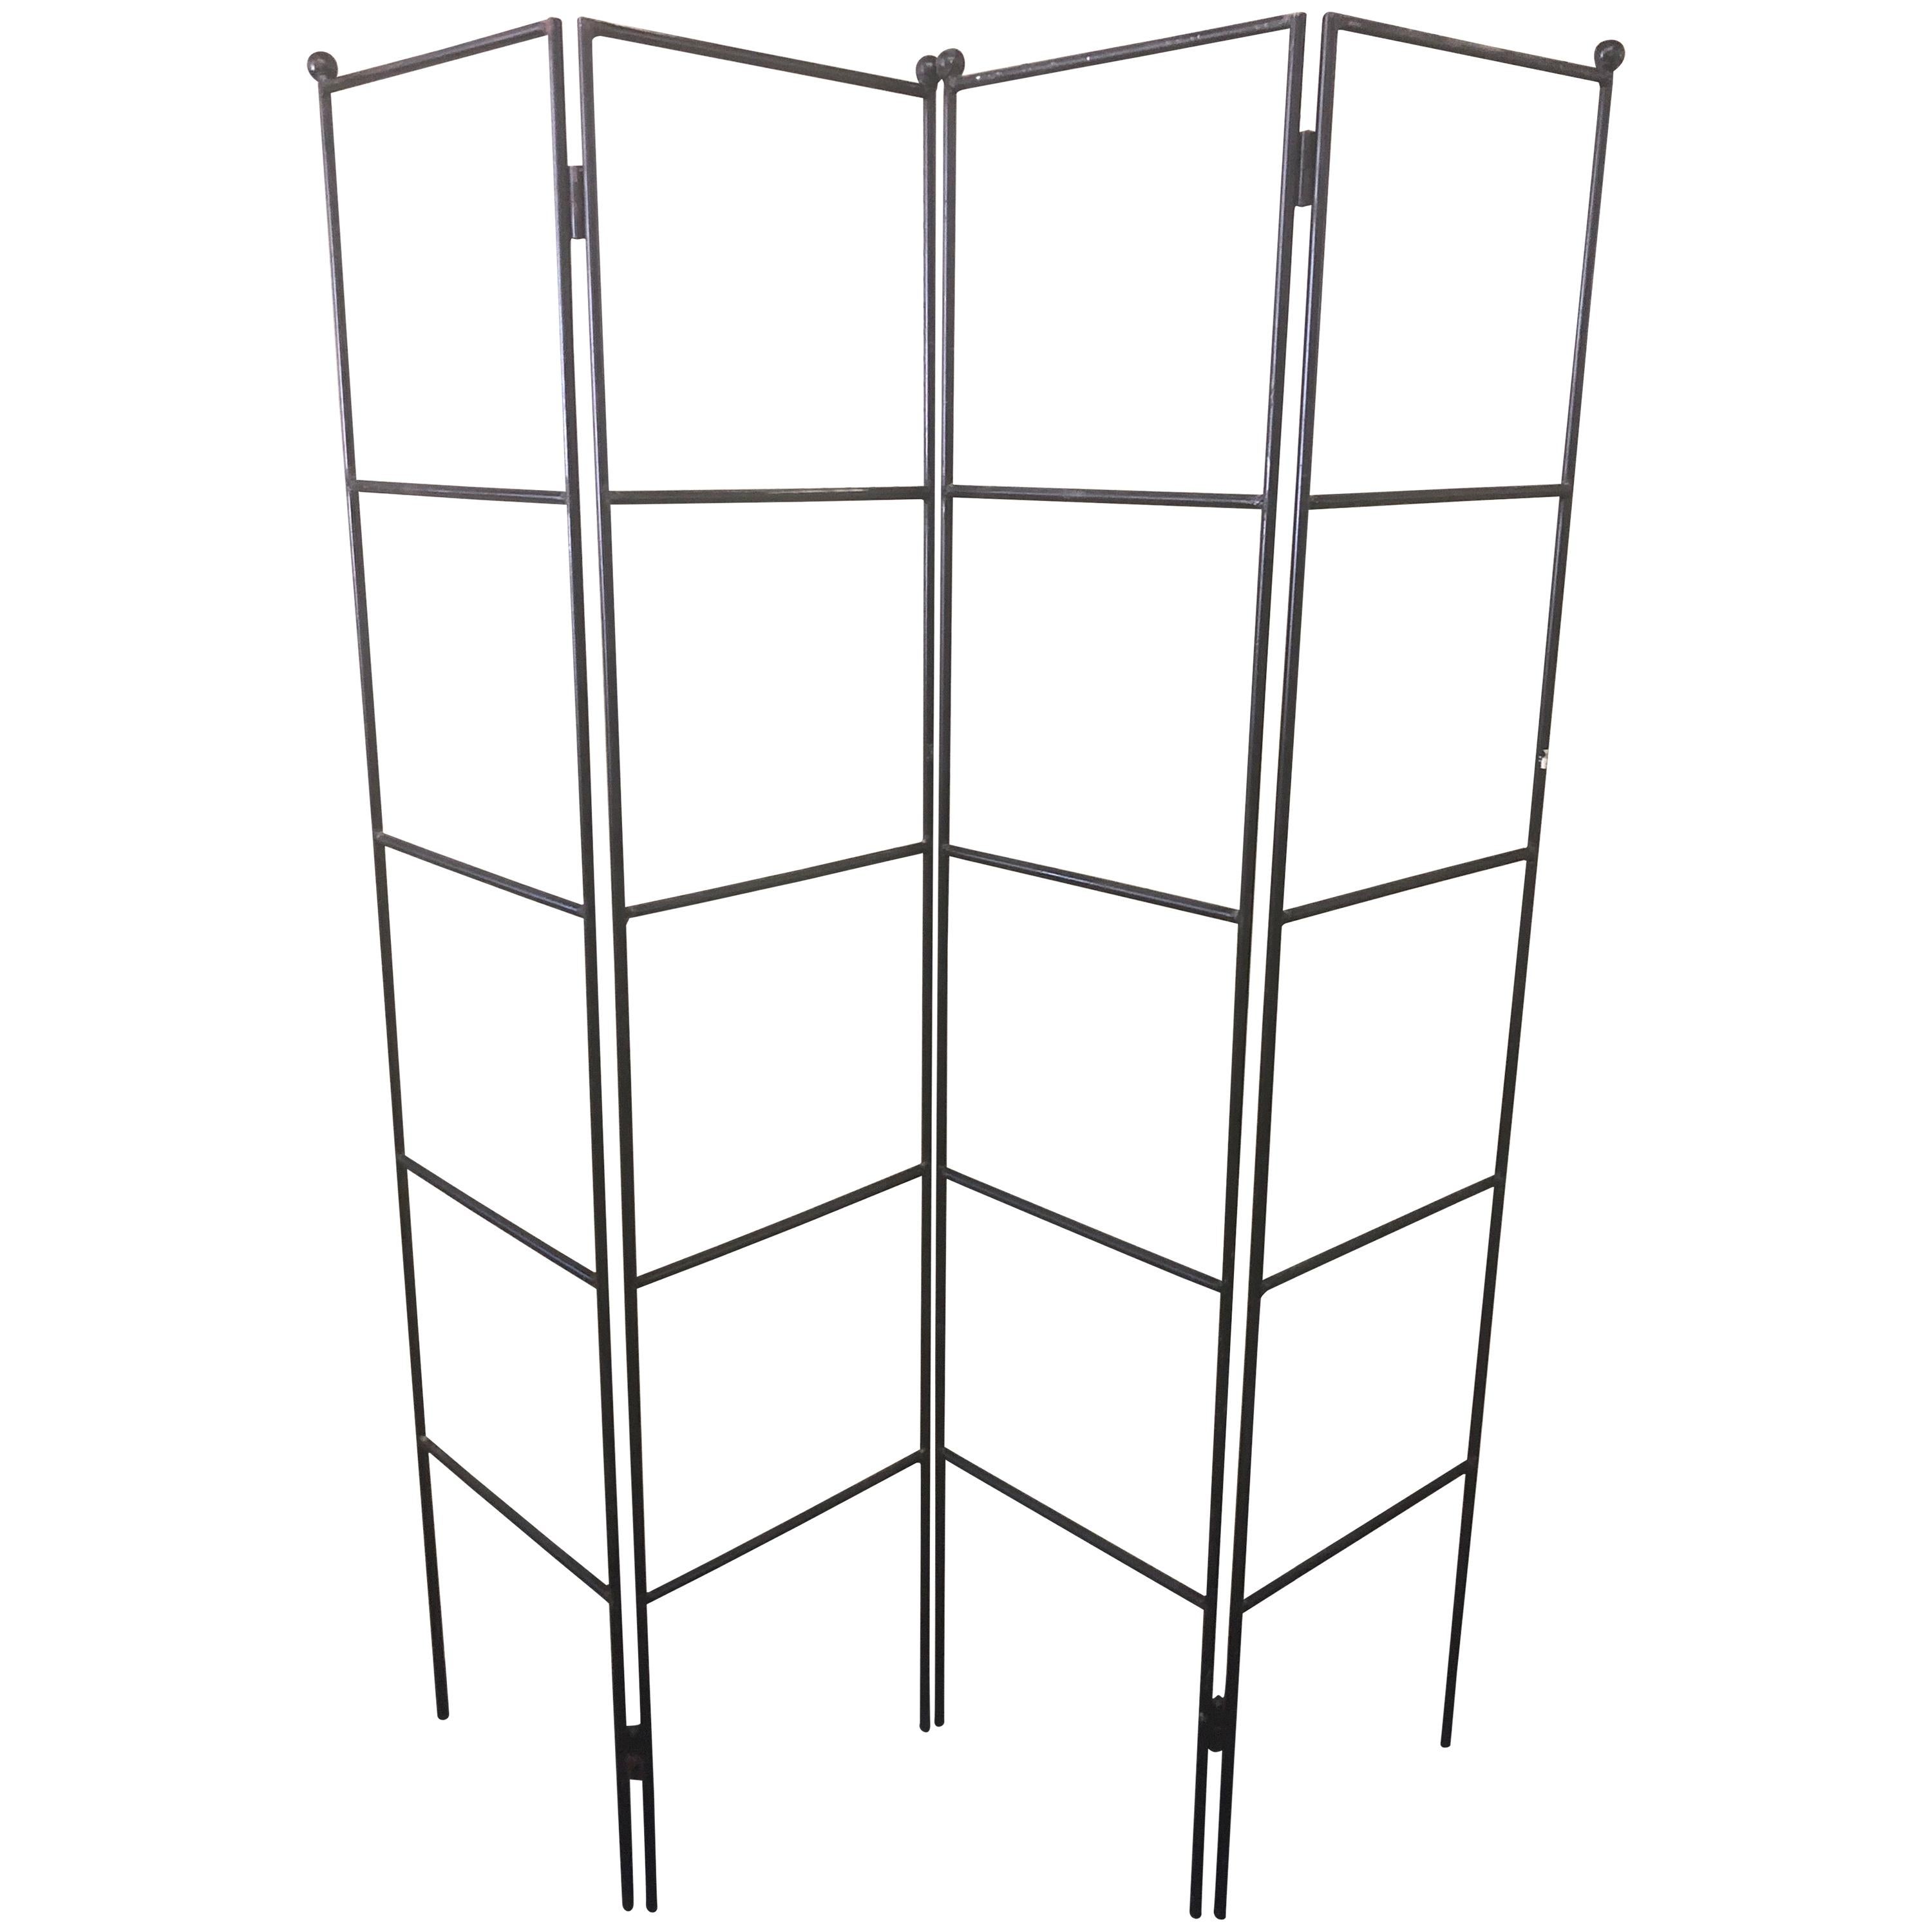 Minimalist Four-Panel Wrought Iron Room Divider / Screen For Sale